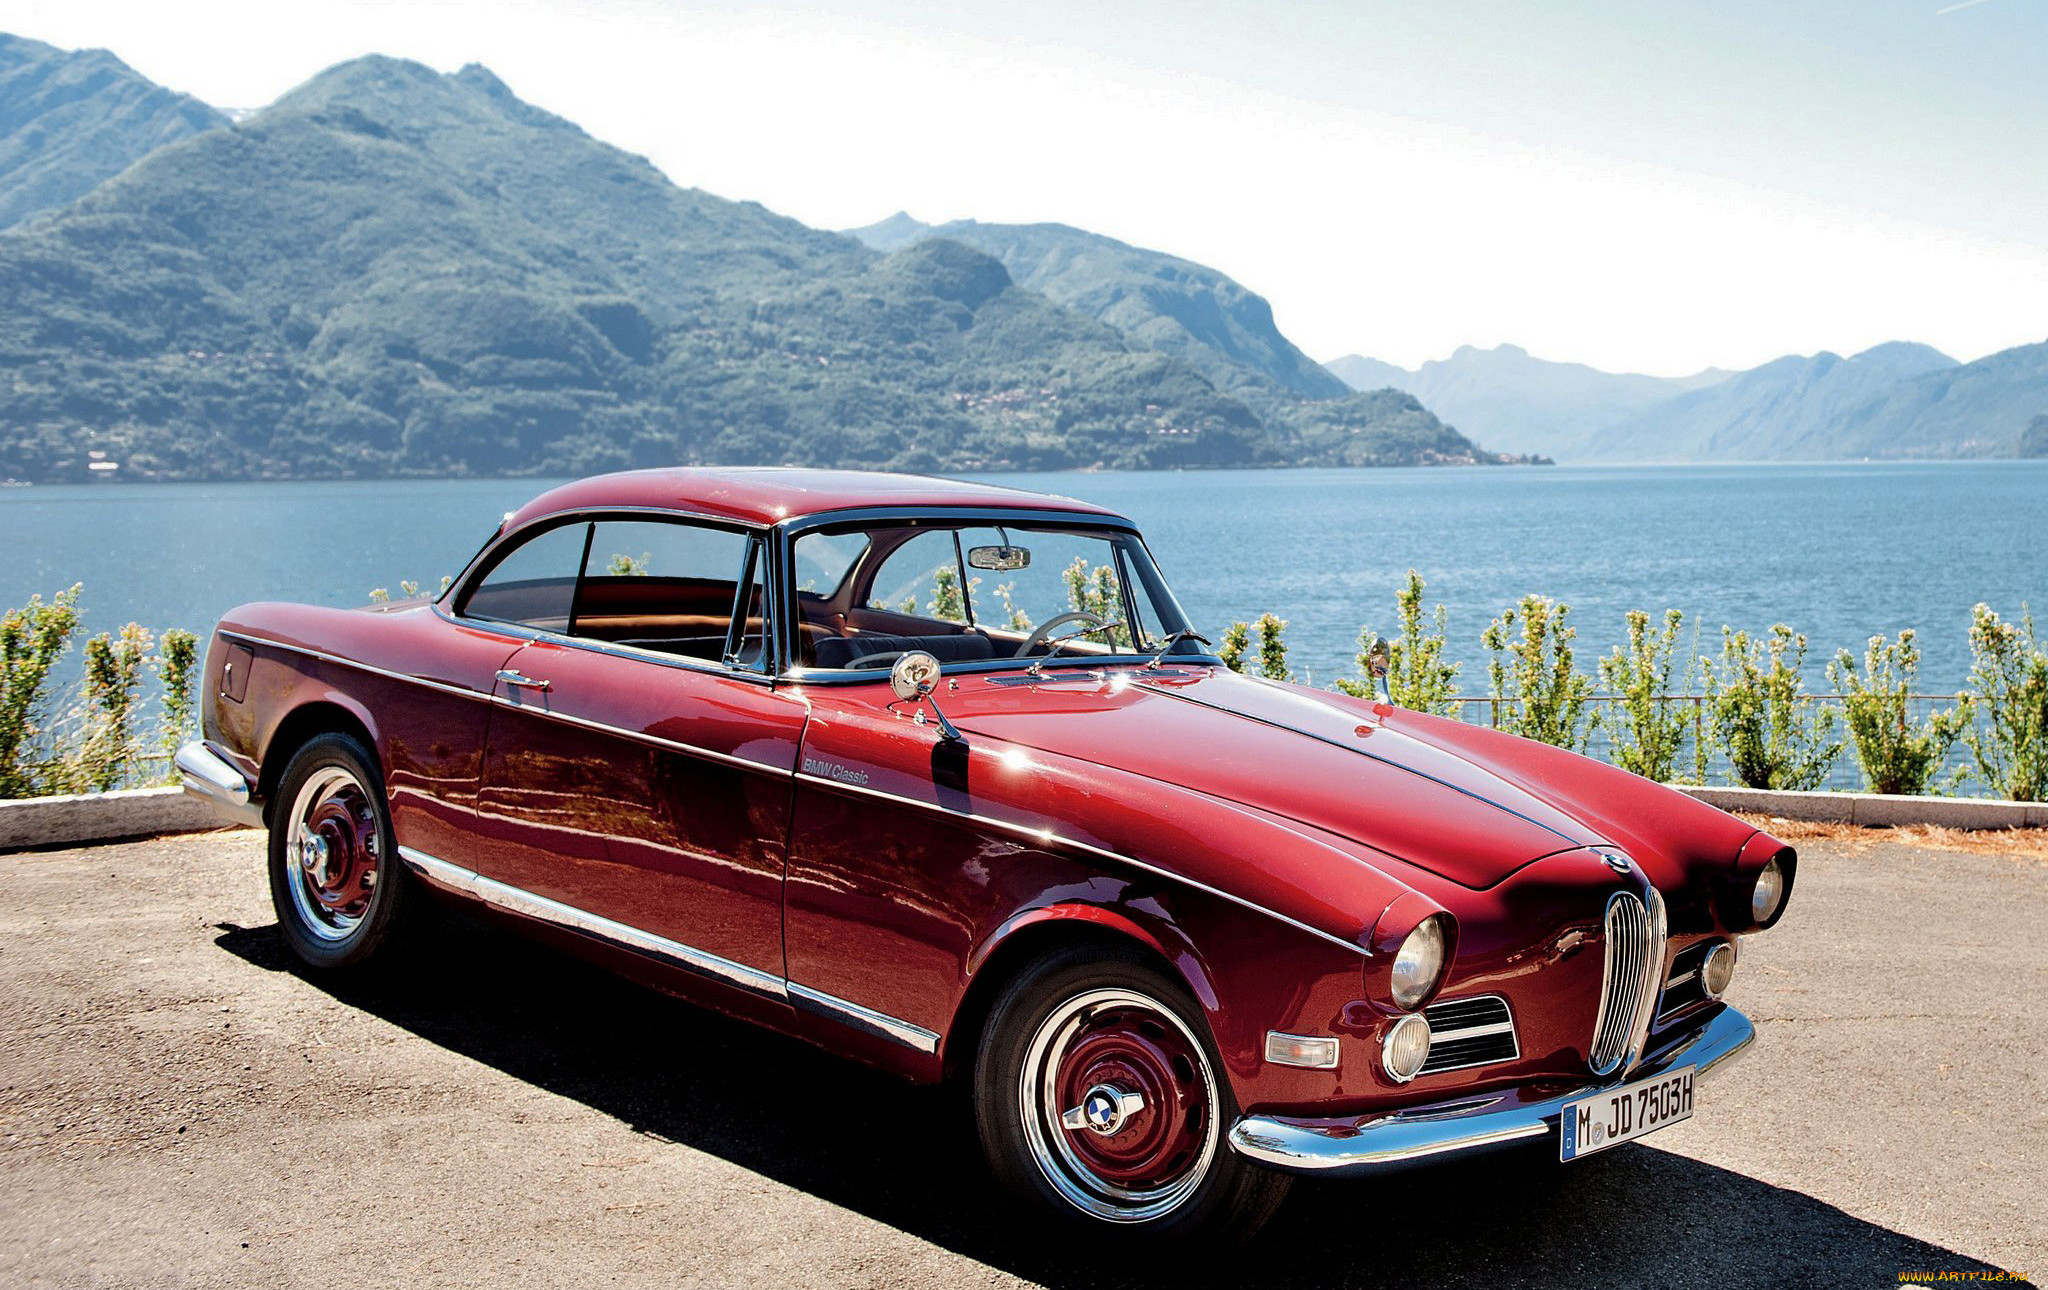 bmw 503 coupe 1956, , bmw, 1956, coupe, 503